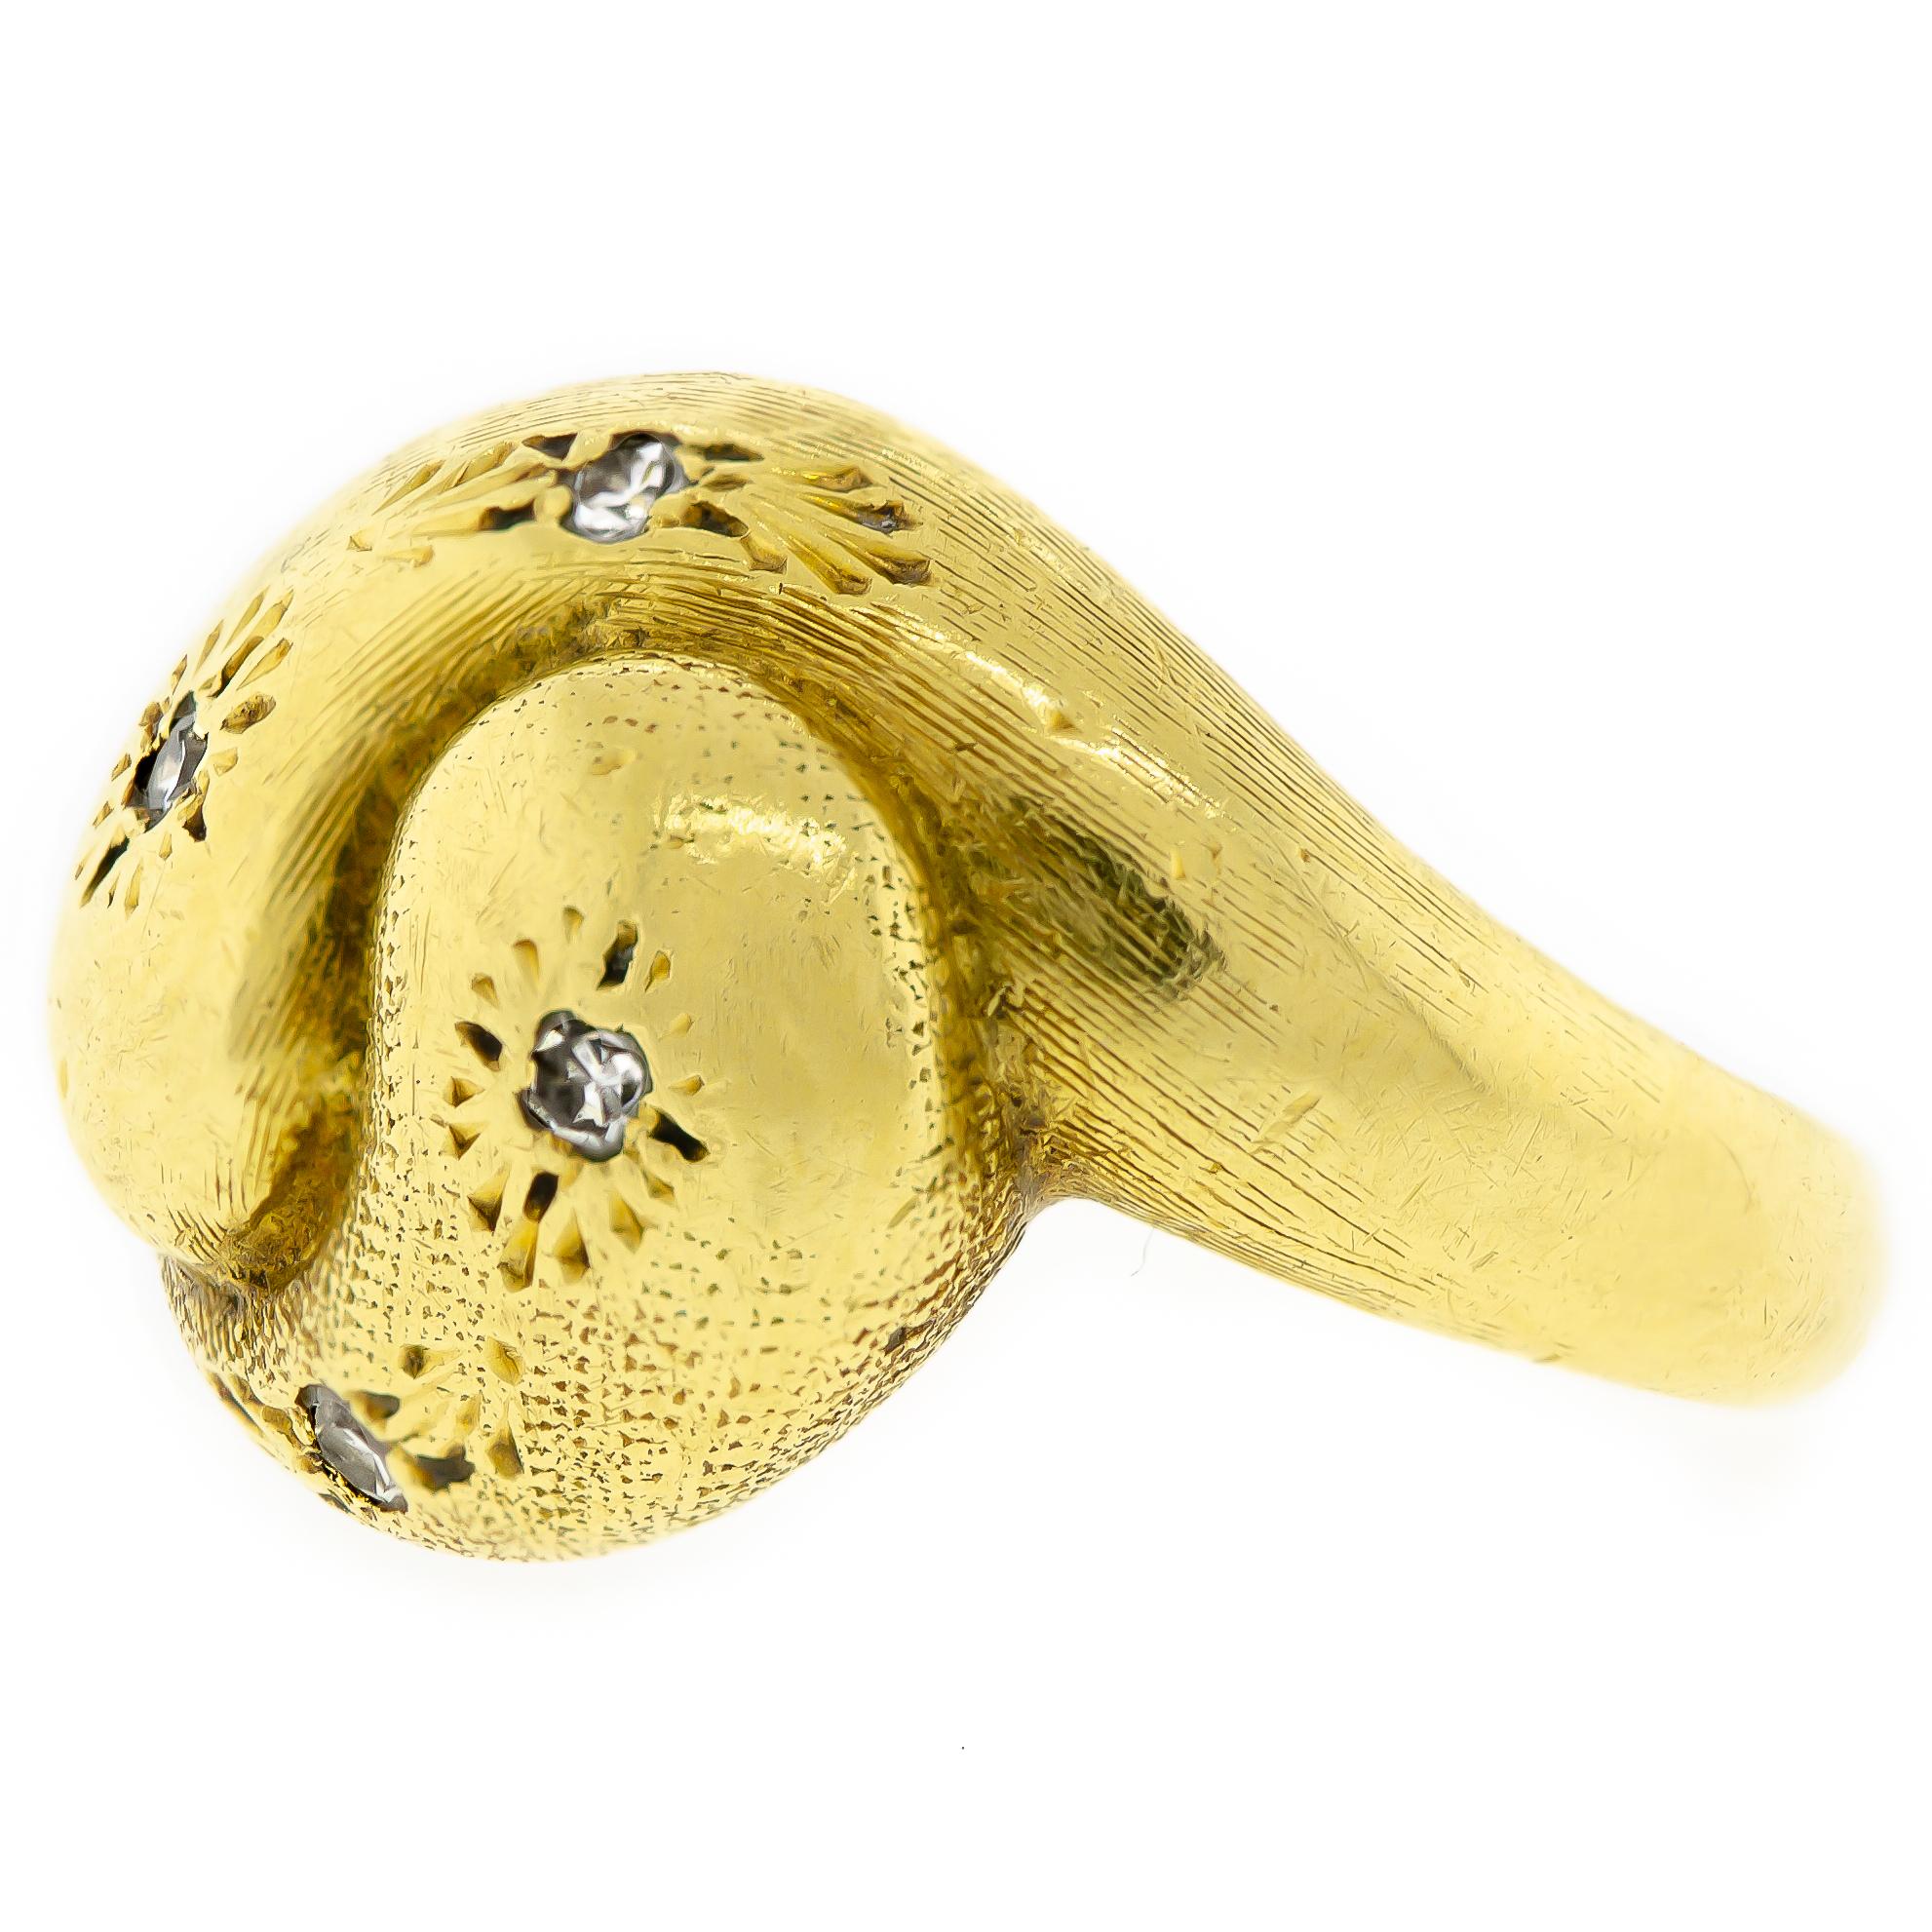 Sharp circa 1930s diamond and 18kt yellow gold double snake ring. This striking ring contains 4 small sparkling single-cut diamonds set into a star-cut pattern on the face of the modified double snake ring. Lovely elegant engraved details cover this